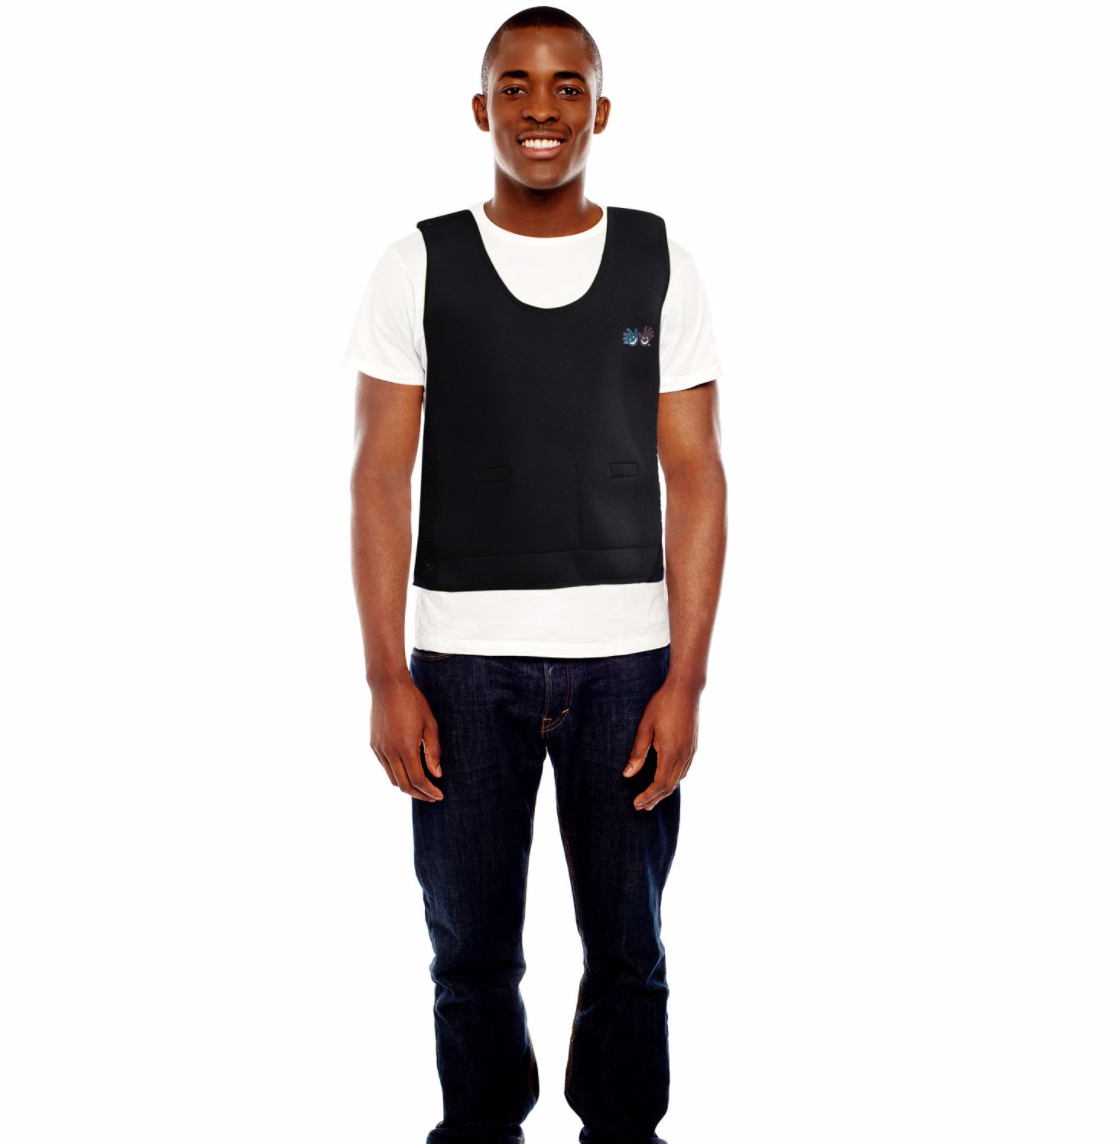 Sensory Clothing Fun & Function Teen/Adult Black  Weighted Compression Vest